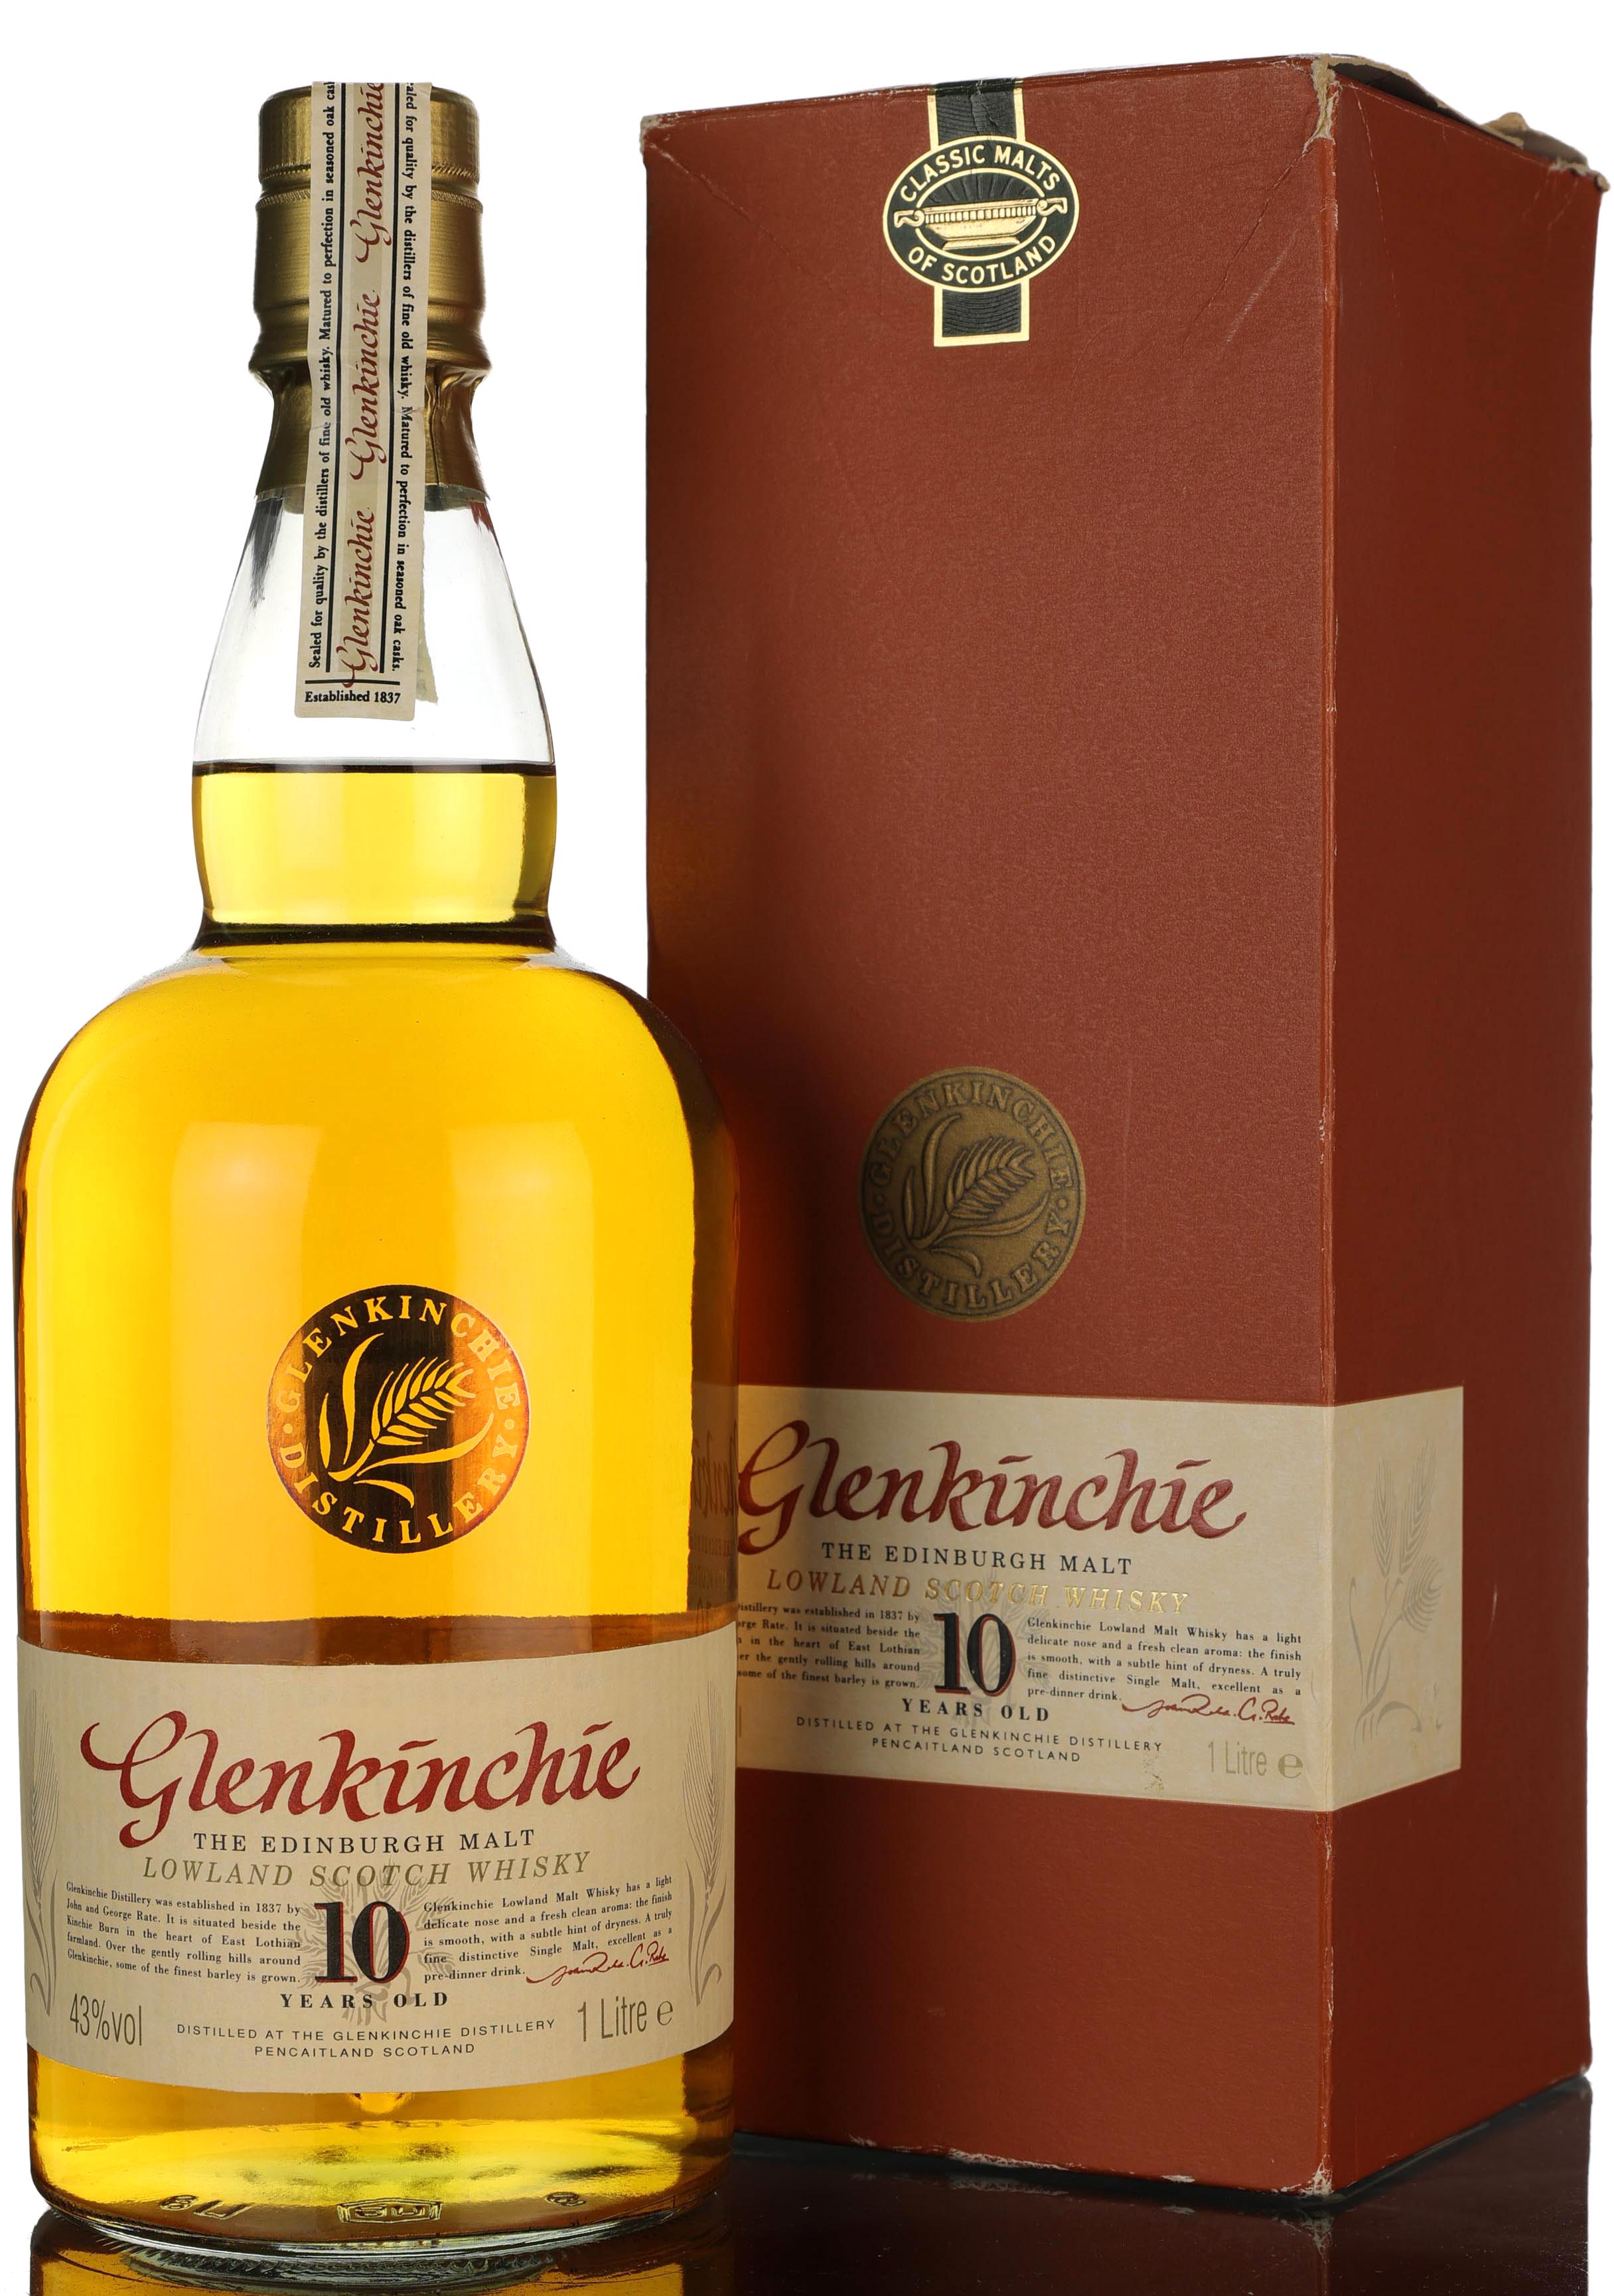 Glenkinchie 10 Year Old - Early 2000s - 1 Litre